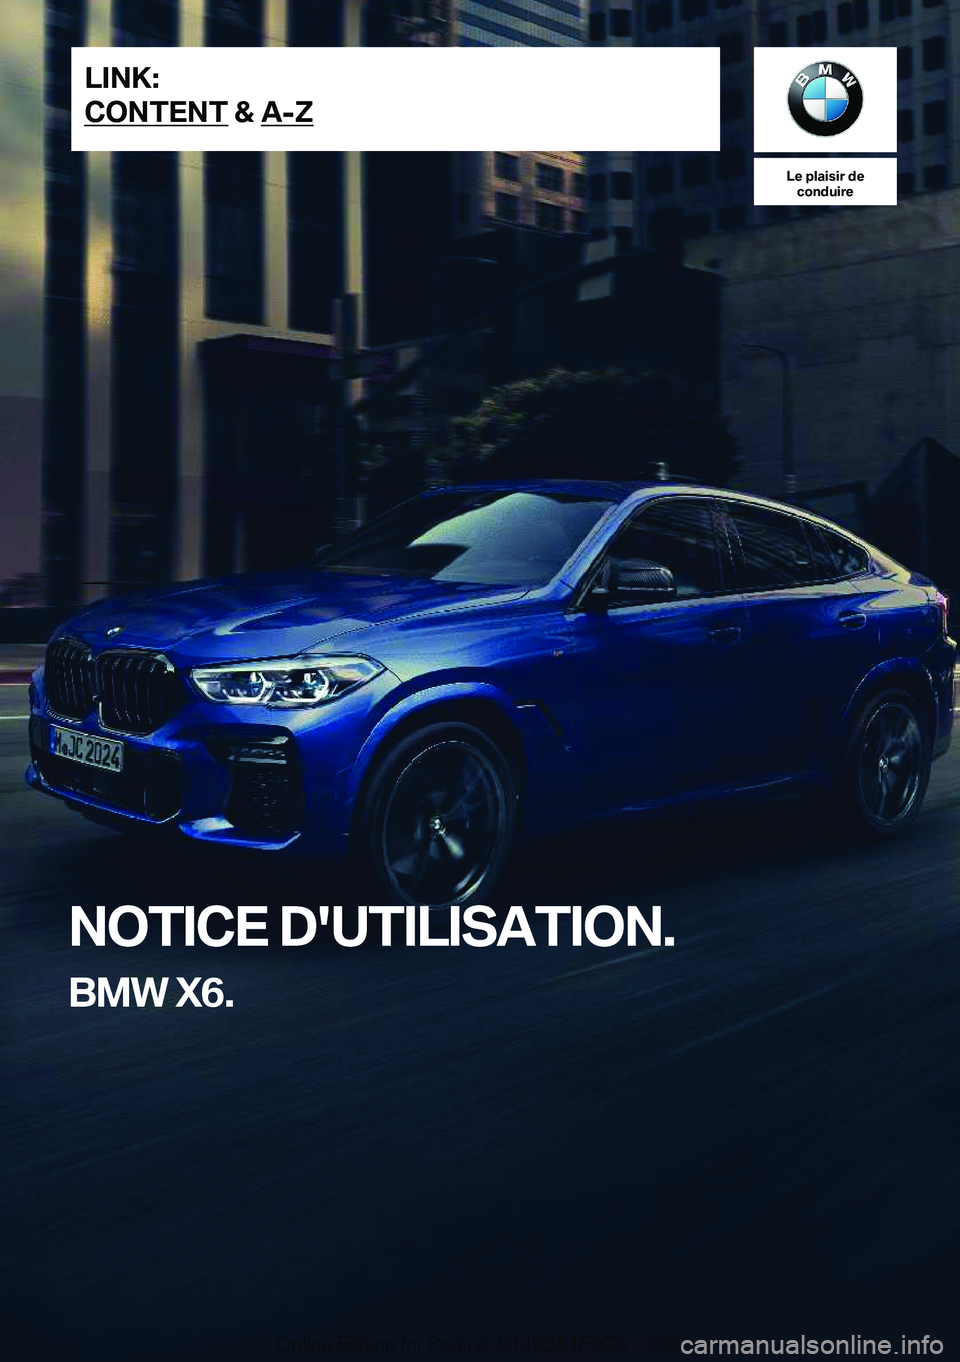 BMW X6 2021  Notices Demploi (in French) �L�e��p�l�a�i�s�i�r��d�e�c�o�n�d�u�i�r�e
�N�O�T�I�C�E��D�'�U�T�I�L�I�S�A�T�I�O�N�.
�B�M�W��X�6�.�L�I�N�K�:
�C�O�N�T�E�N�T��&��A�-�Z�O�n�l�i�n�e��E�d�i�t�i�o�n��f�o�r��P�a�r�t��n�o�.��0�